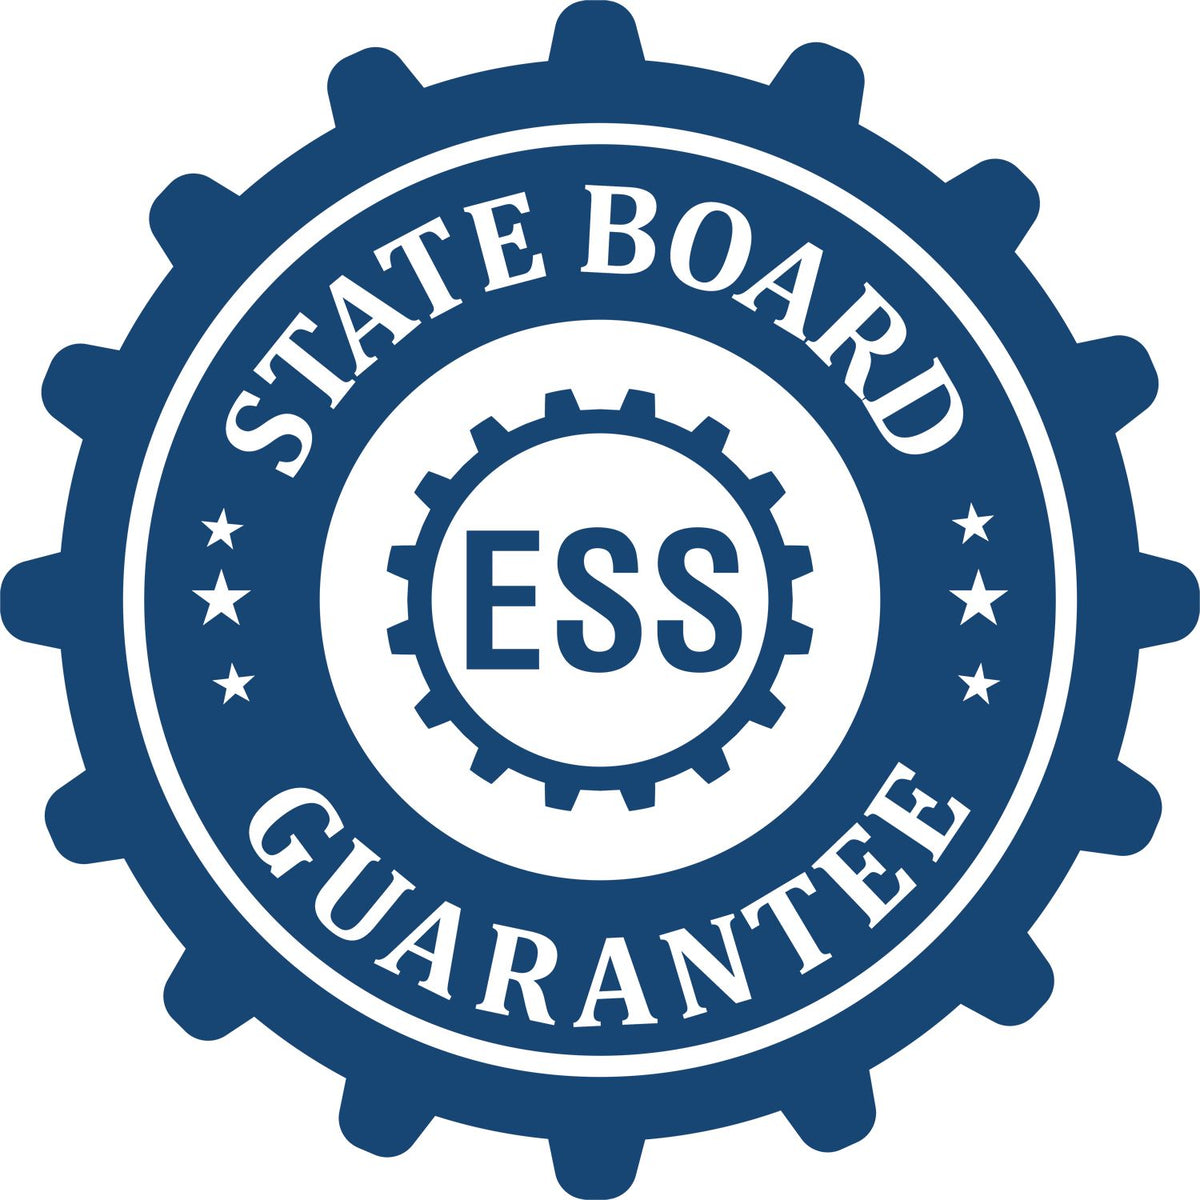 An emblem in a gear shape illustrating a state board guarantee for the Virginia Landscape Architectural Seal Stamp product.